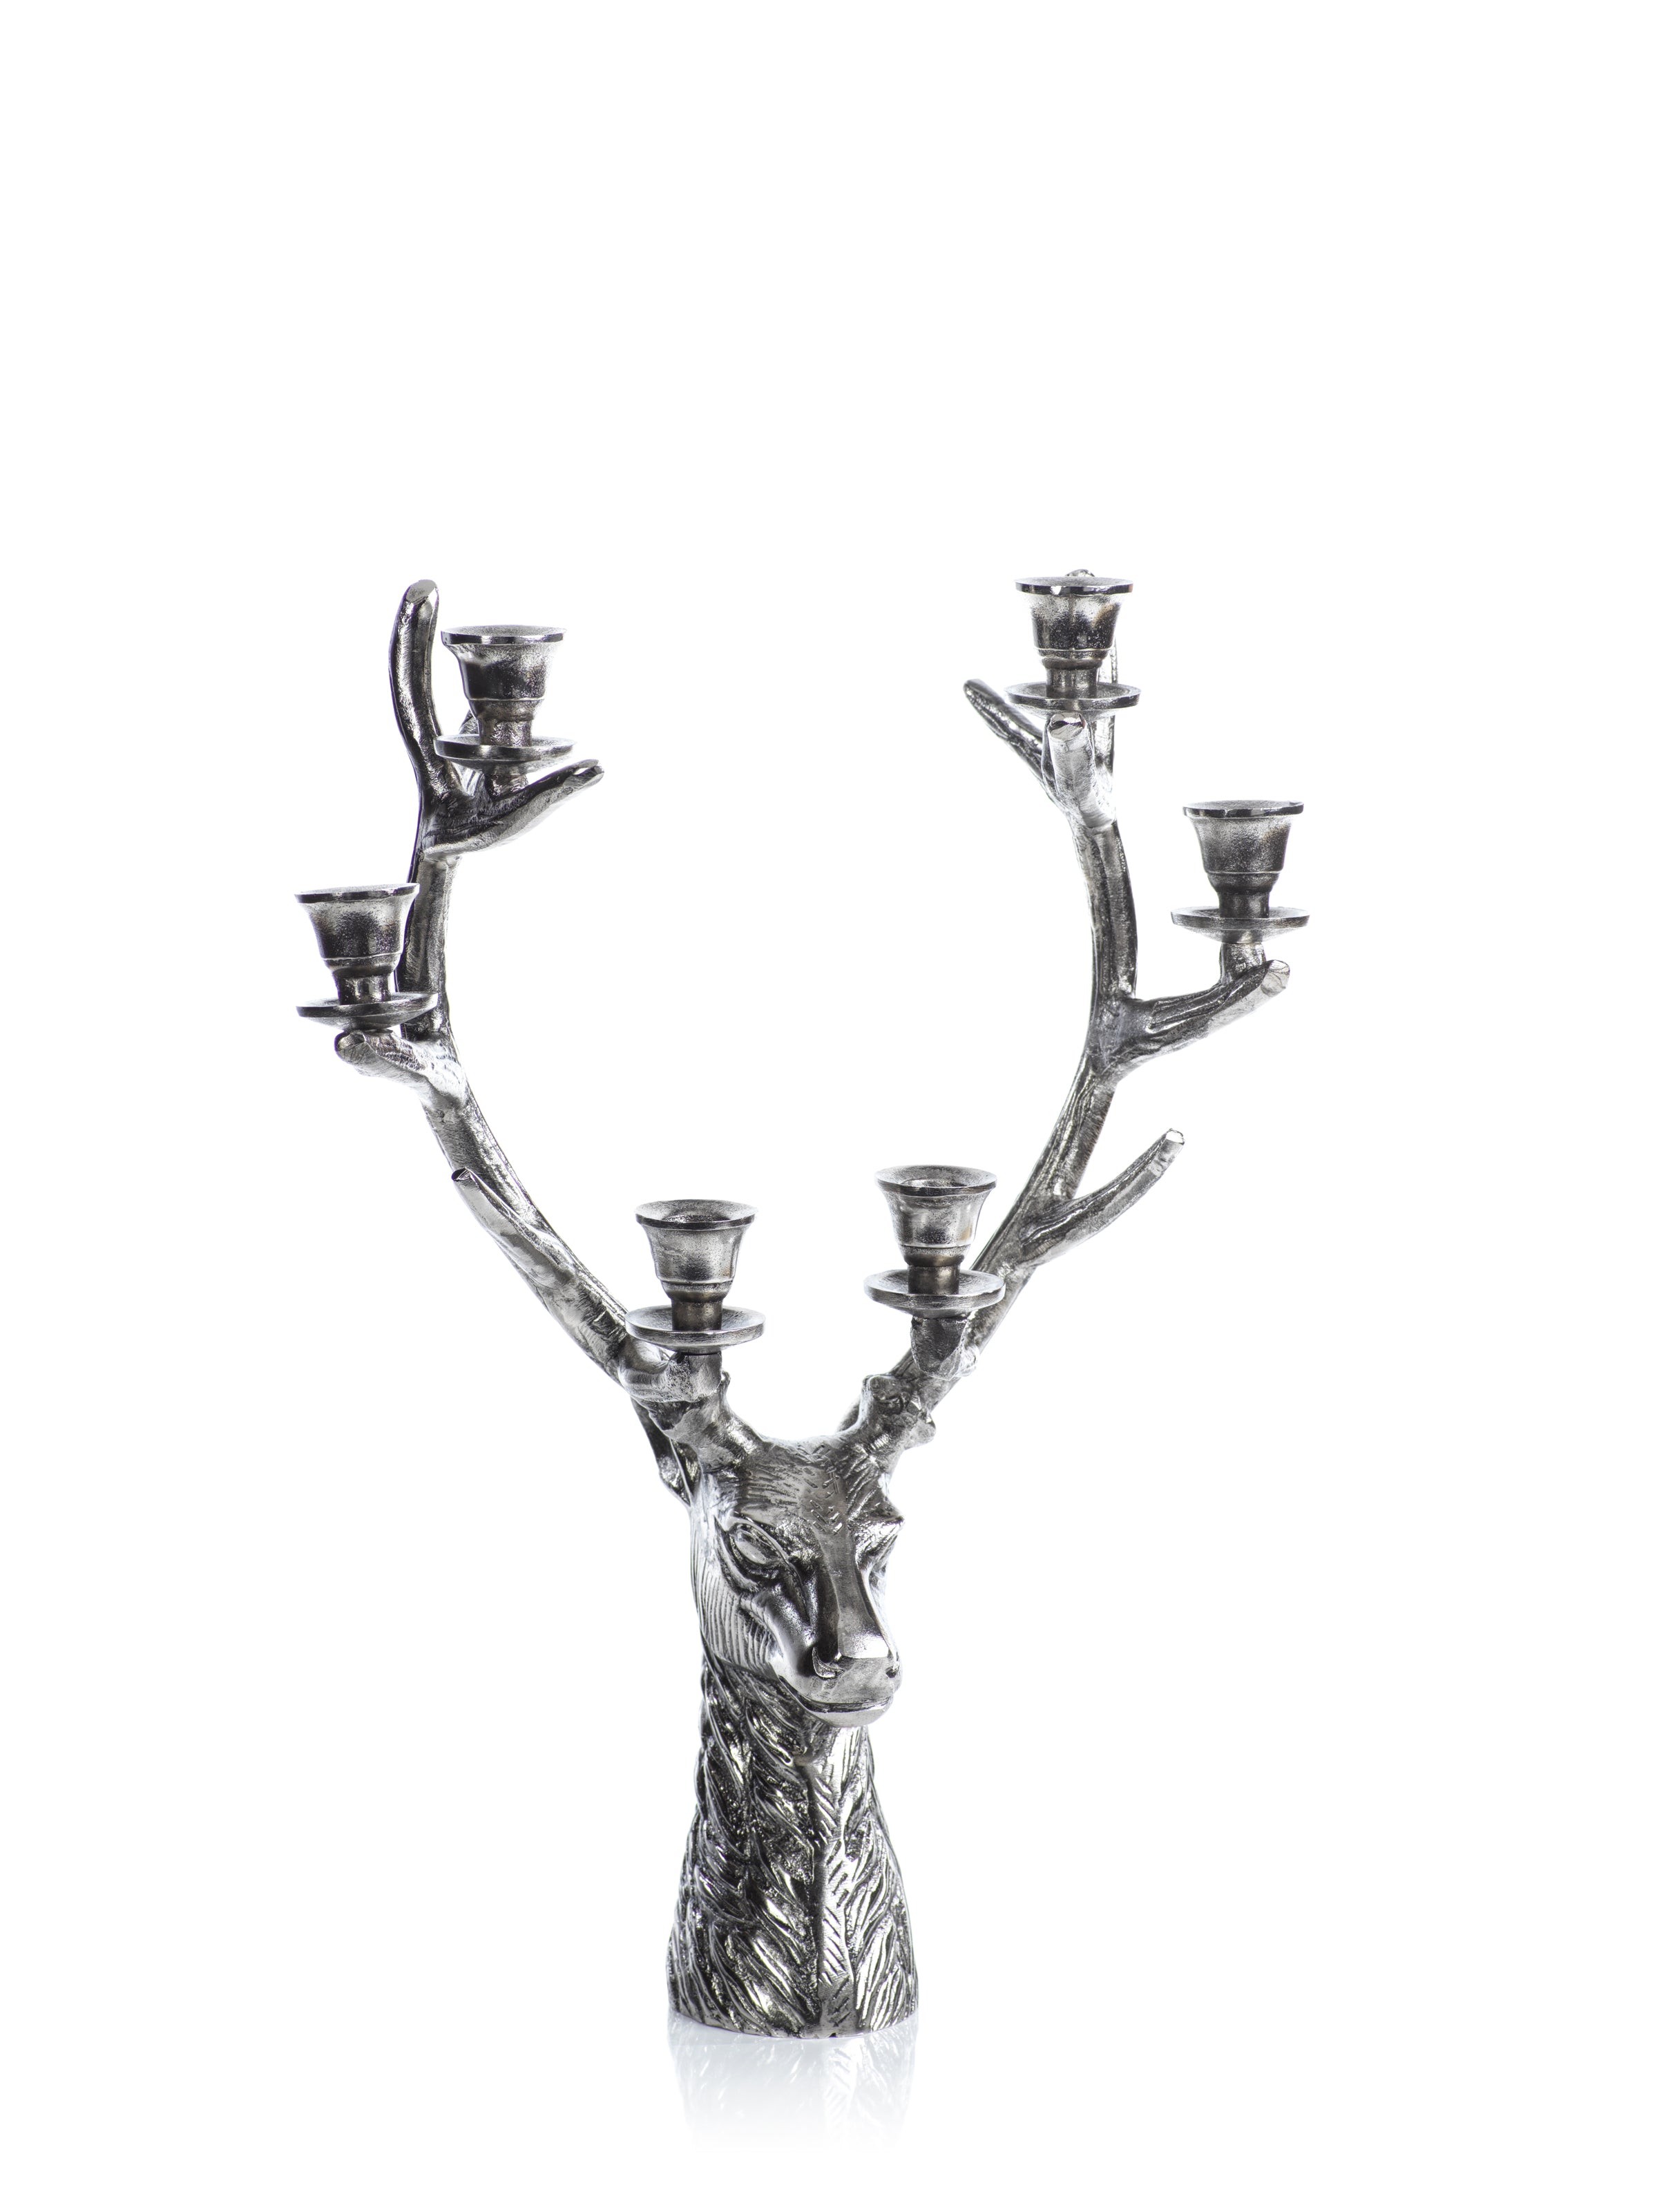 Stag Head 6 Tier Candleholder - Silver Antique - 2 Sizes - CARLYLE AVENUE